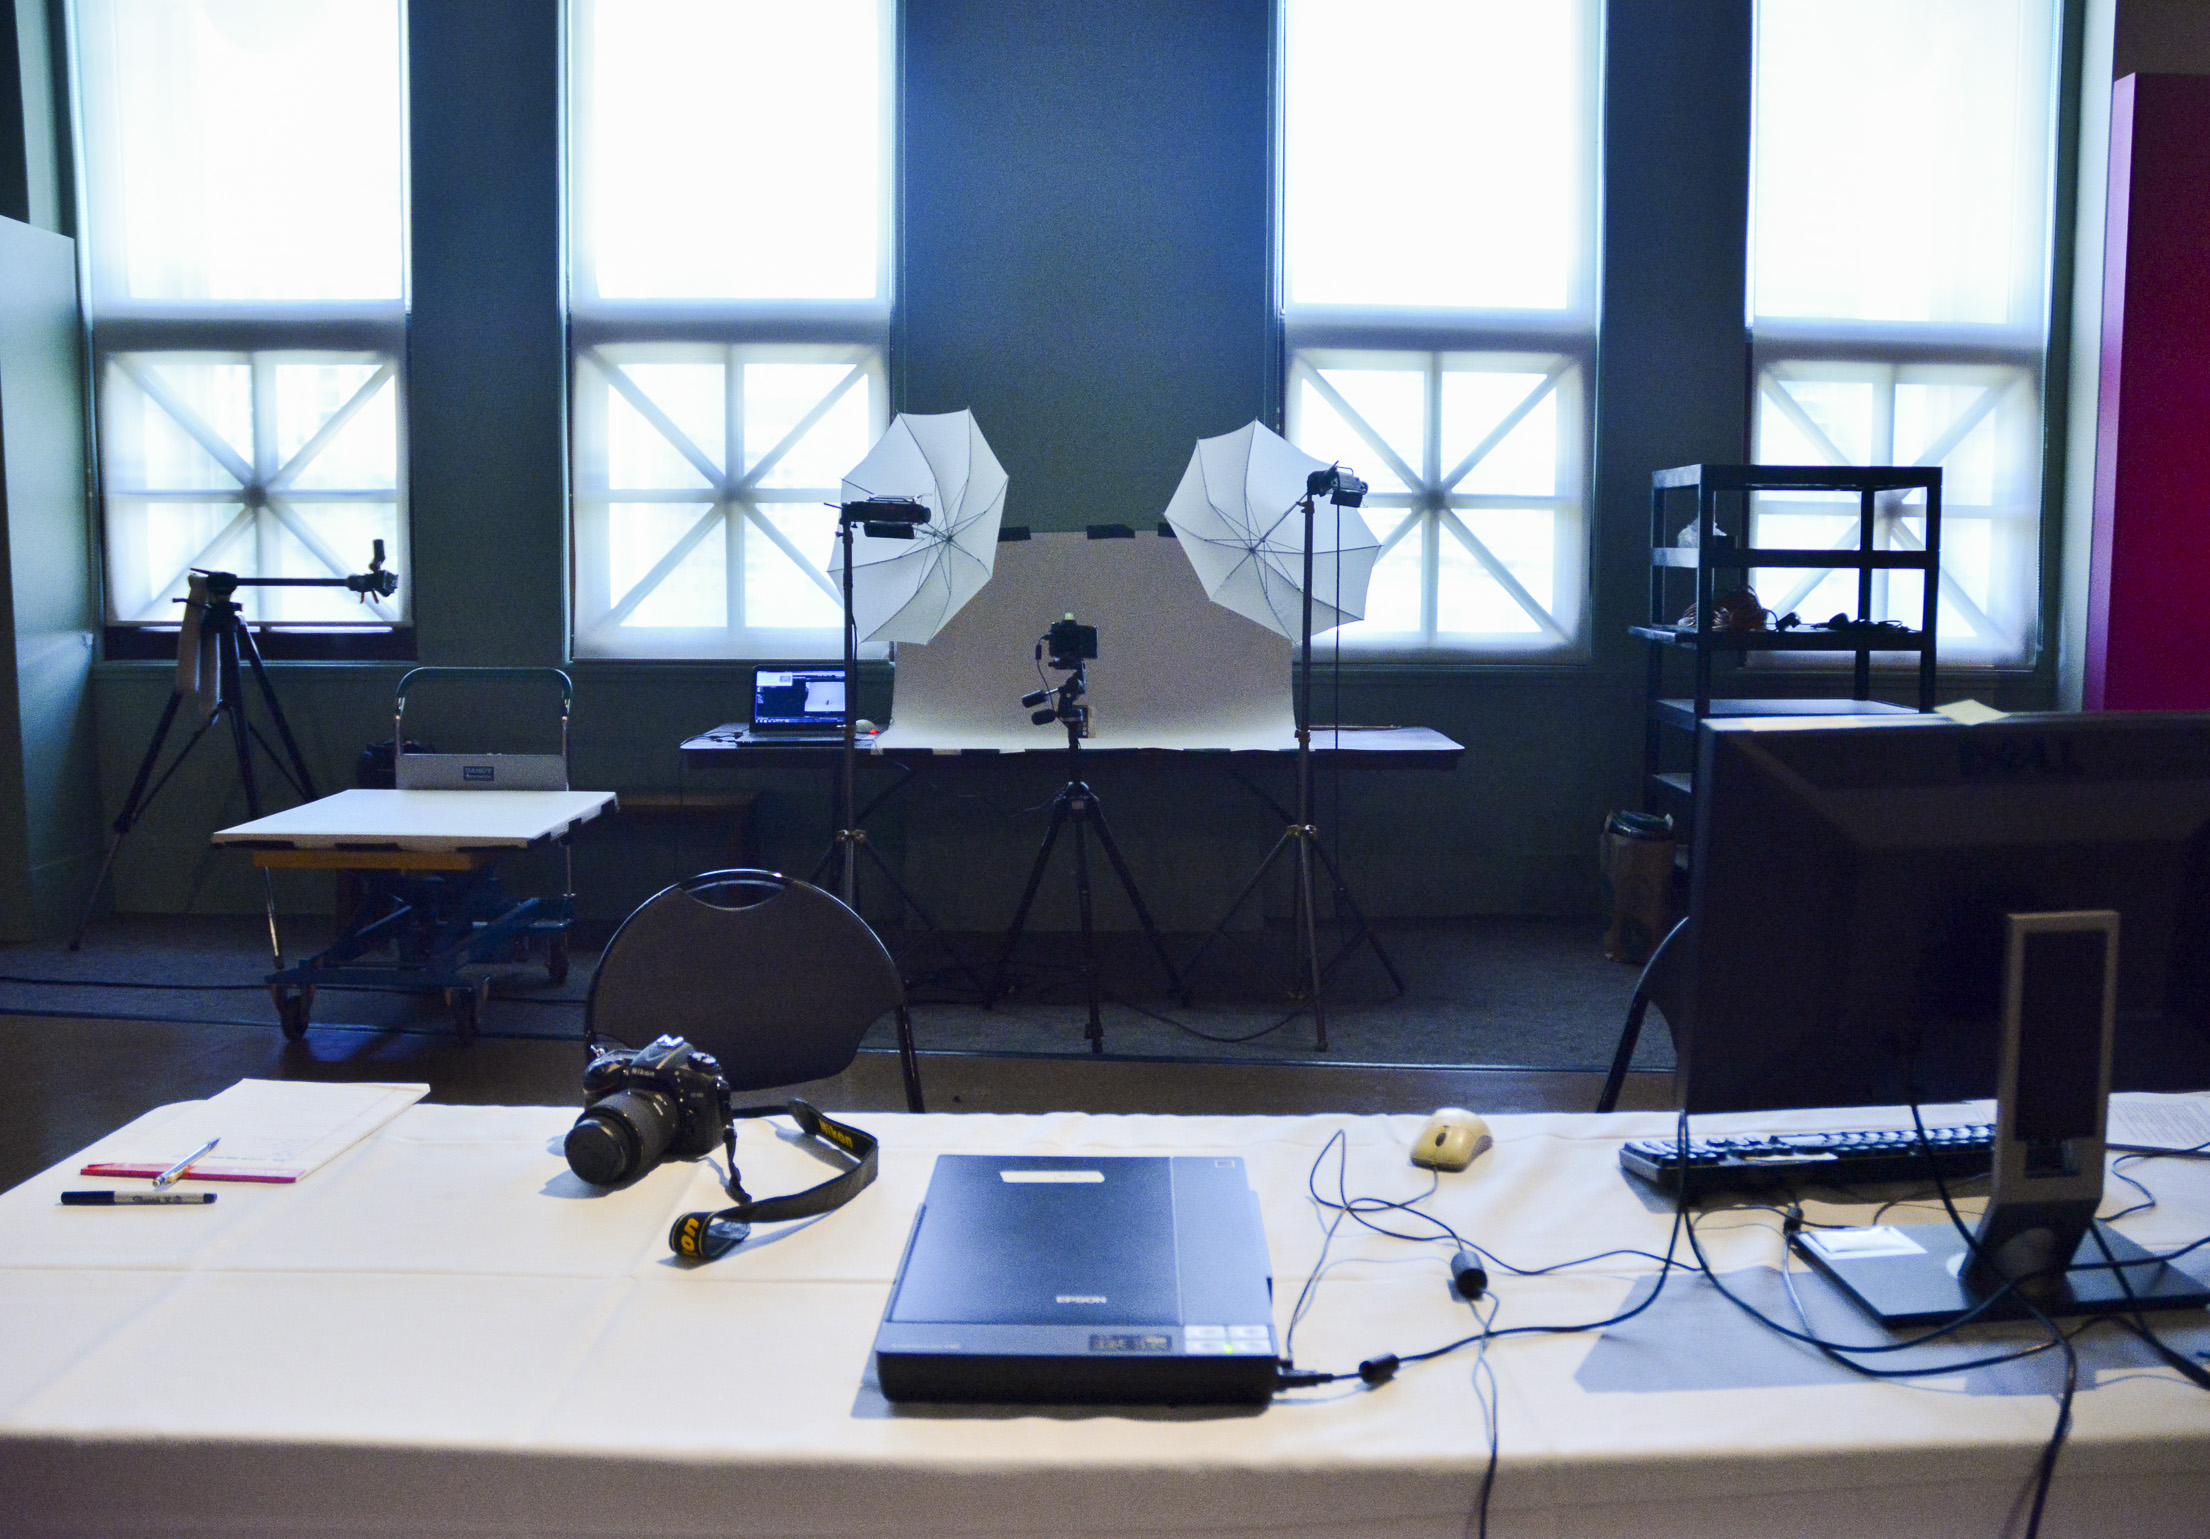 Scanning and photography set up (c) Field Museum of Natural History - CC BY-NC 4.0